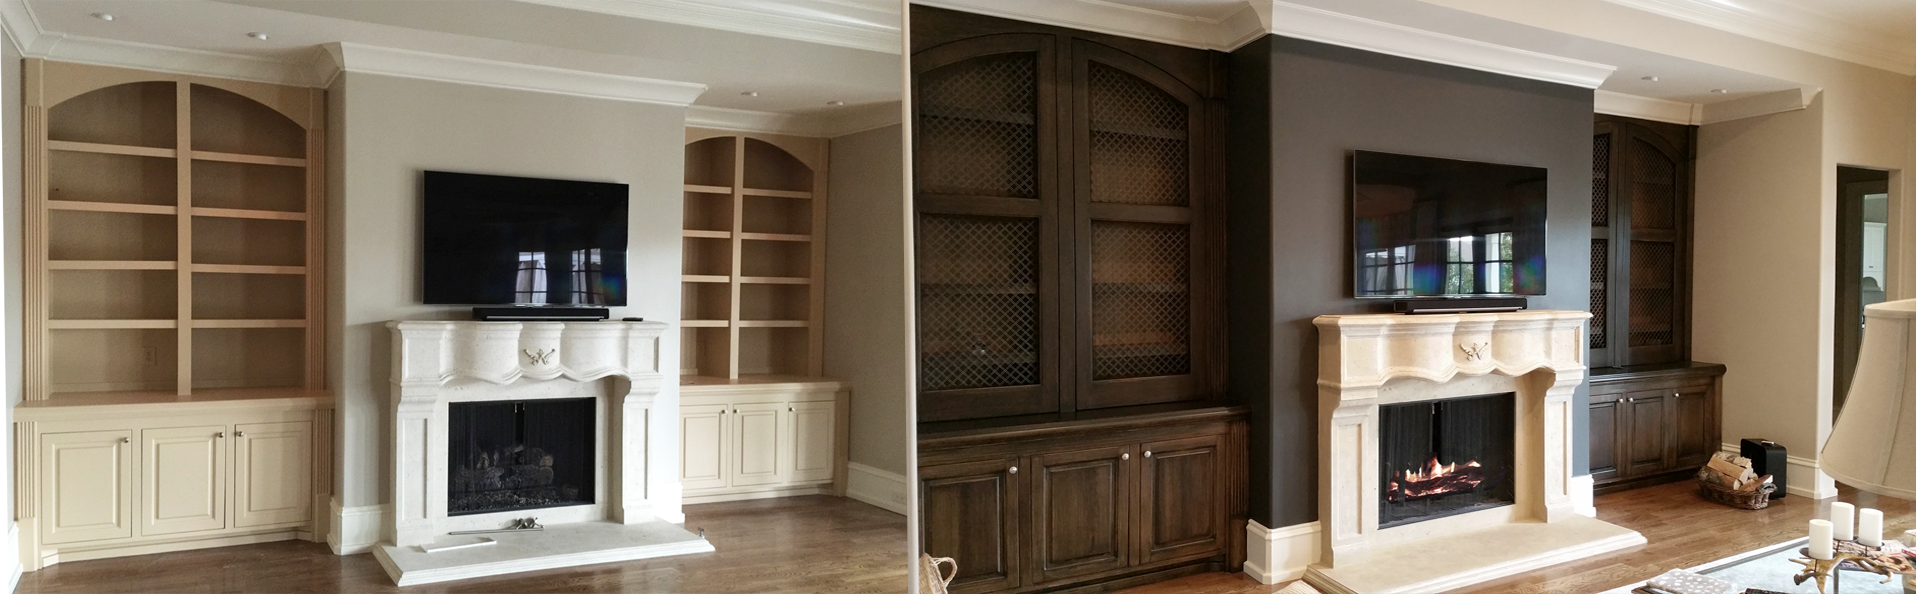 Before and After - Built-in rich looking wood glazed cabinets